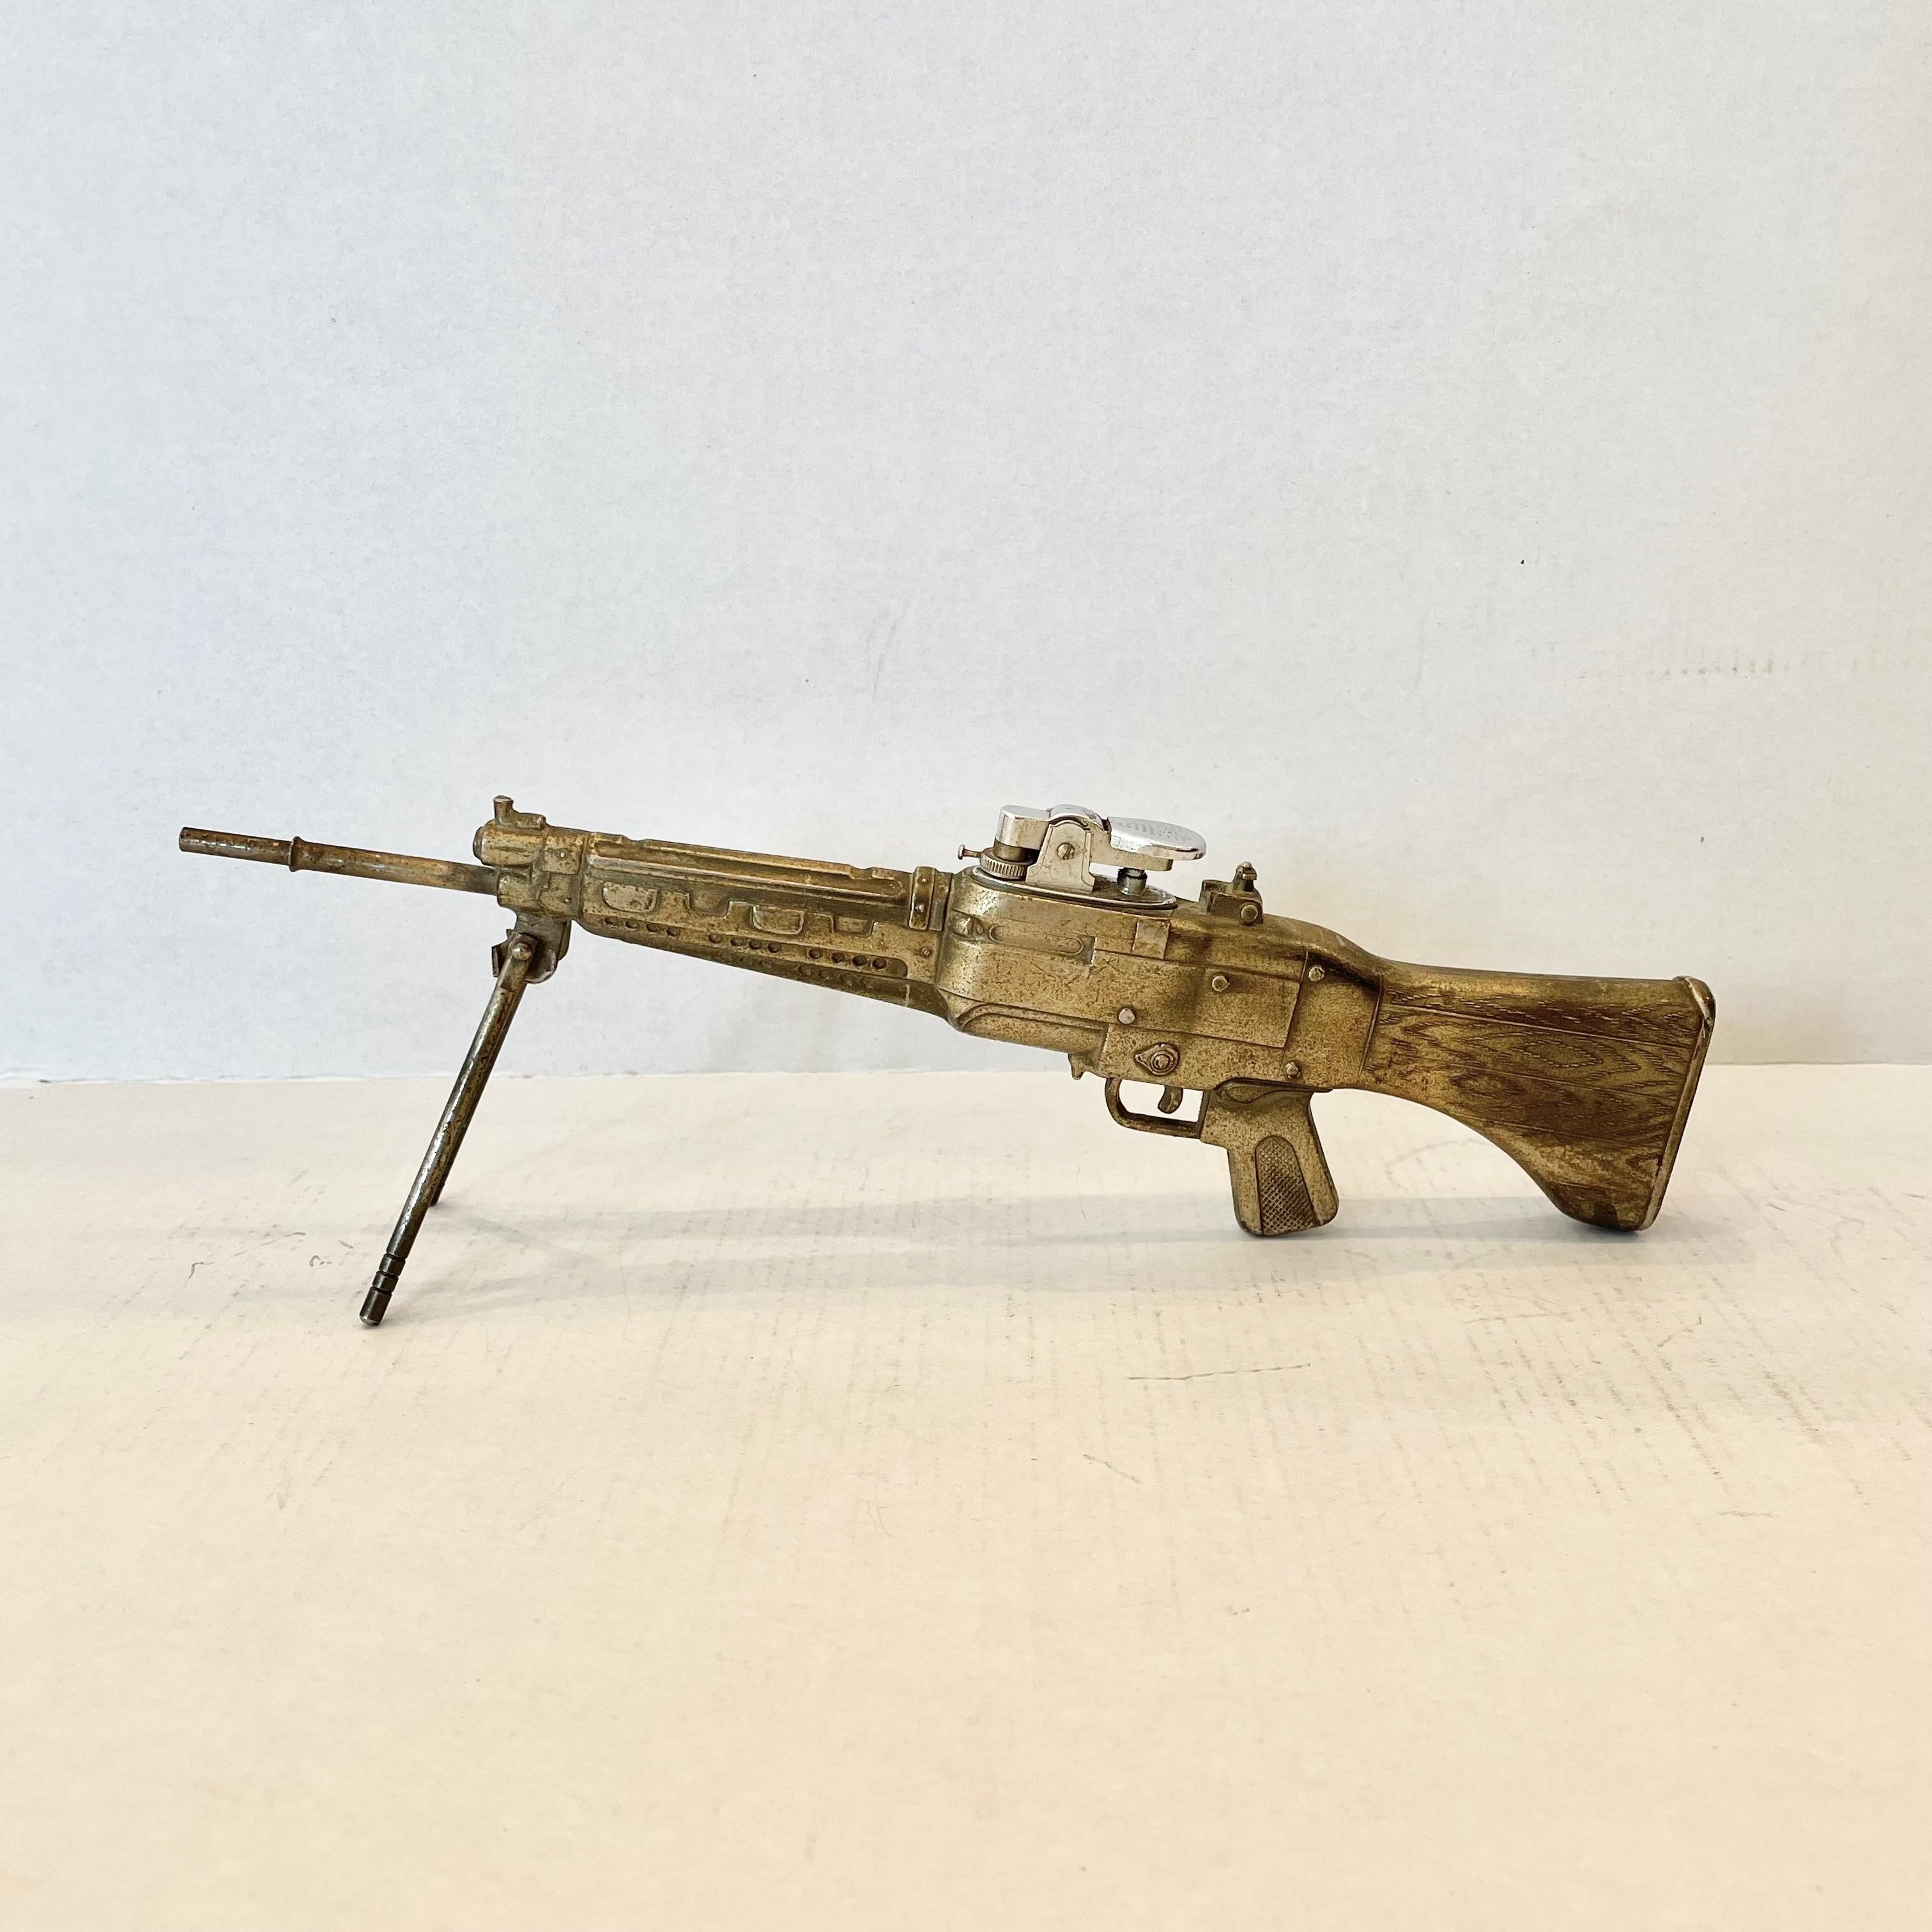 Cool vintage table lighter in the shape of a C6 machine gun. Made of metal and stands up on its own. Bipod arms fold up and down. Heavy patina giving this piece a unique color with silver and brown hues. Cool tobacco accessory and conversation